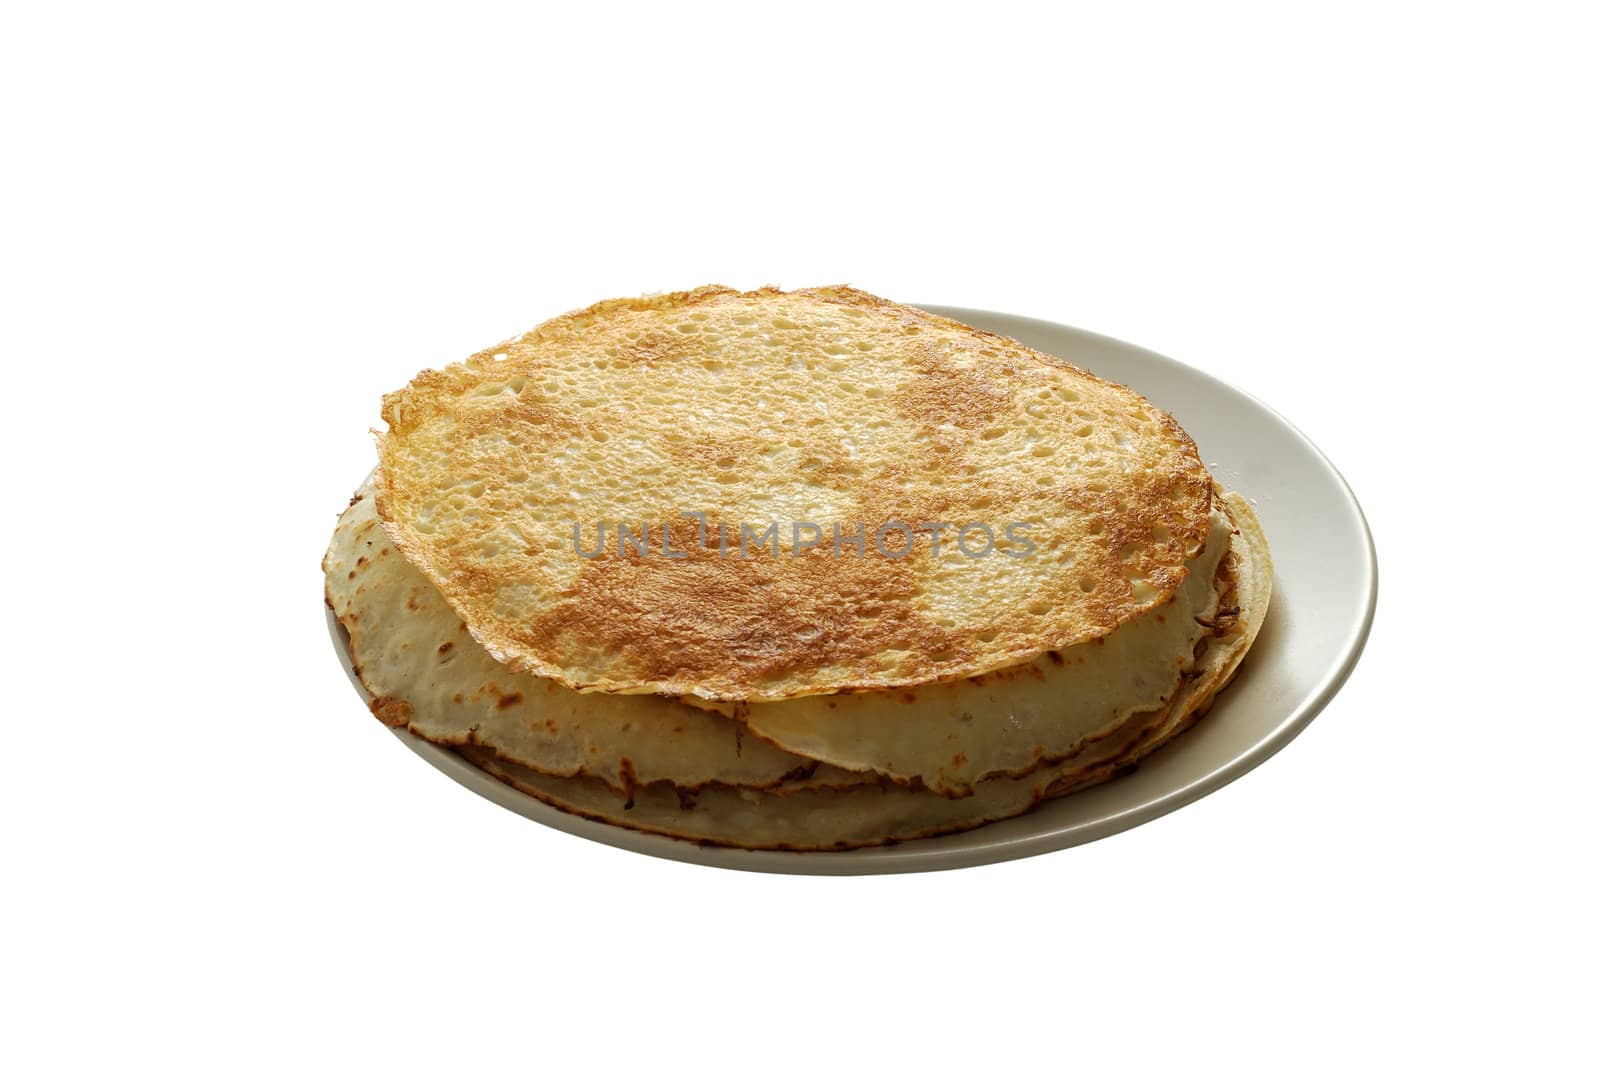 Blini on plate, russian traditional thin round pancakes